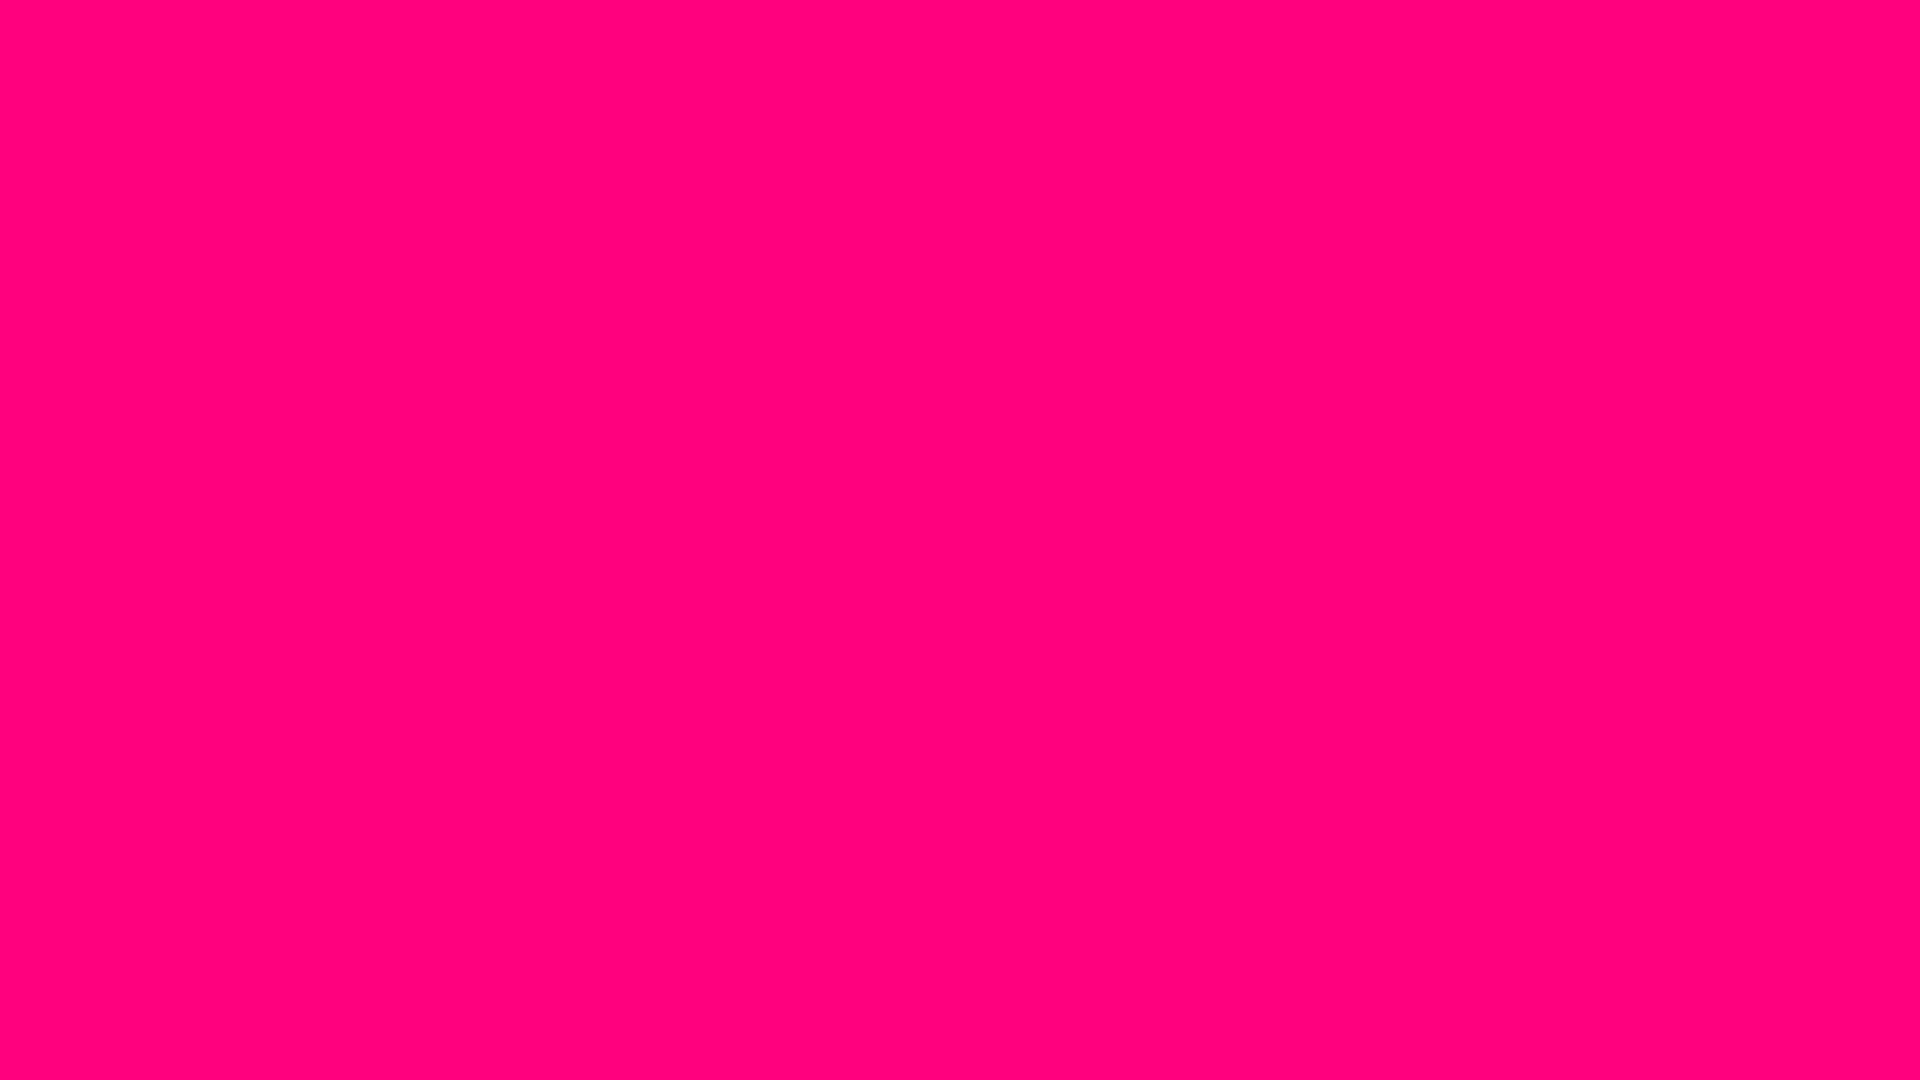 1920x1080 Bright Pink Solid Color Background